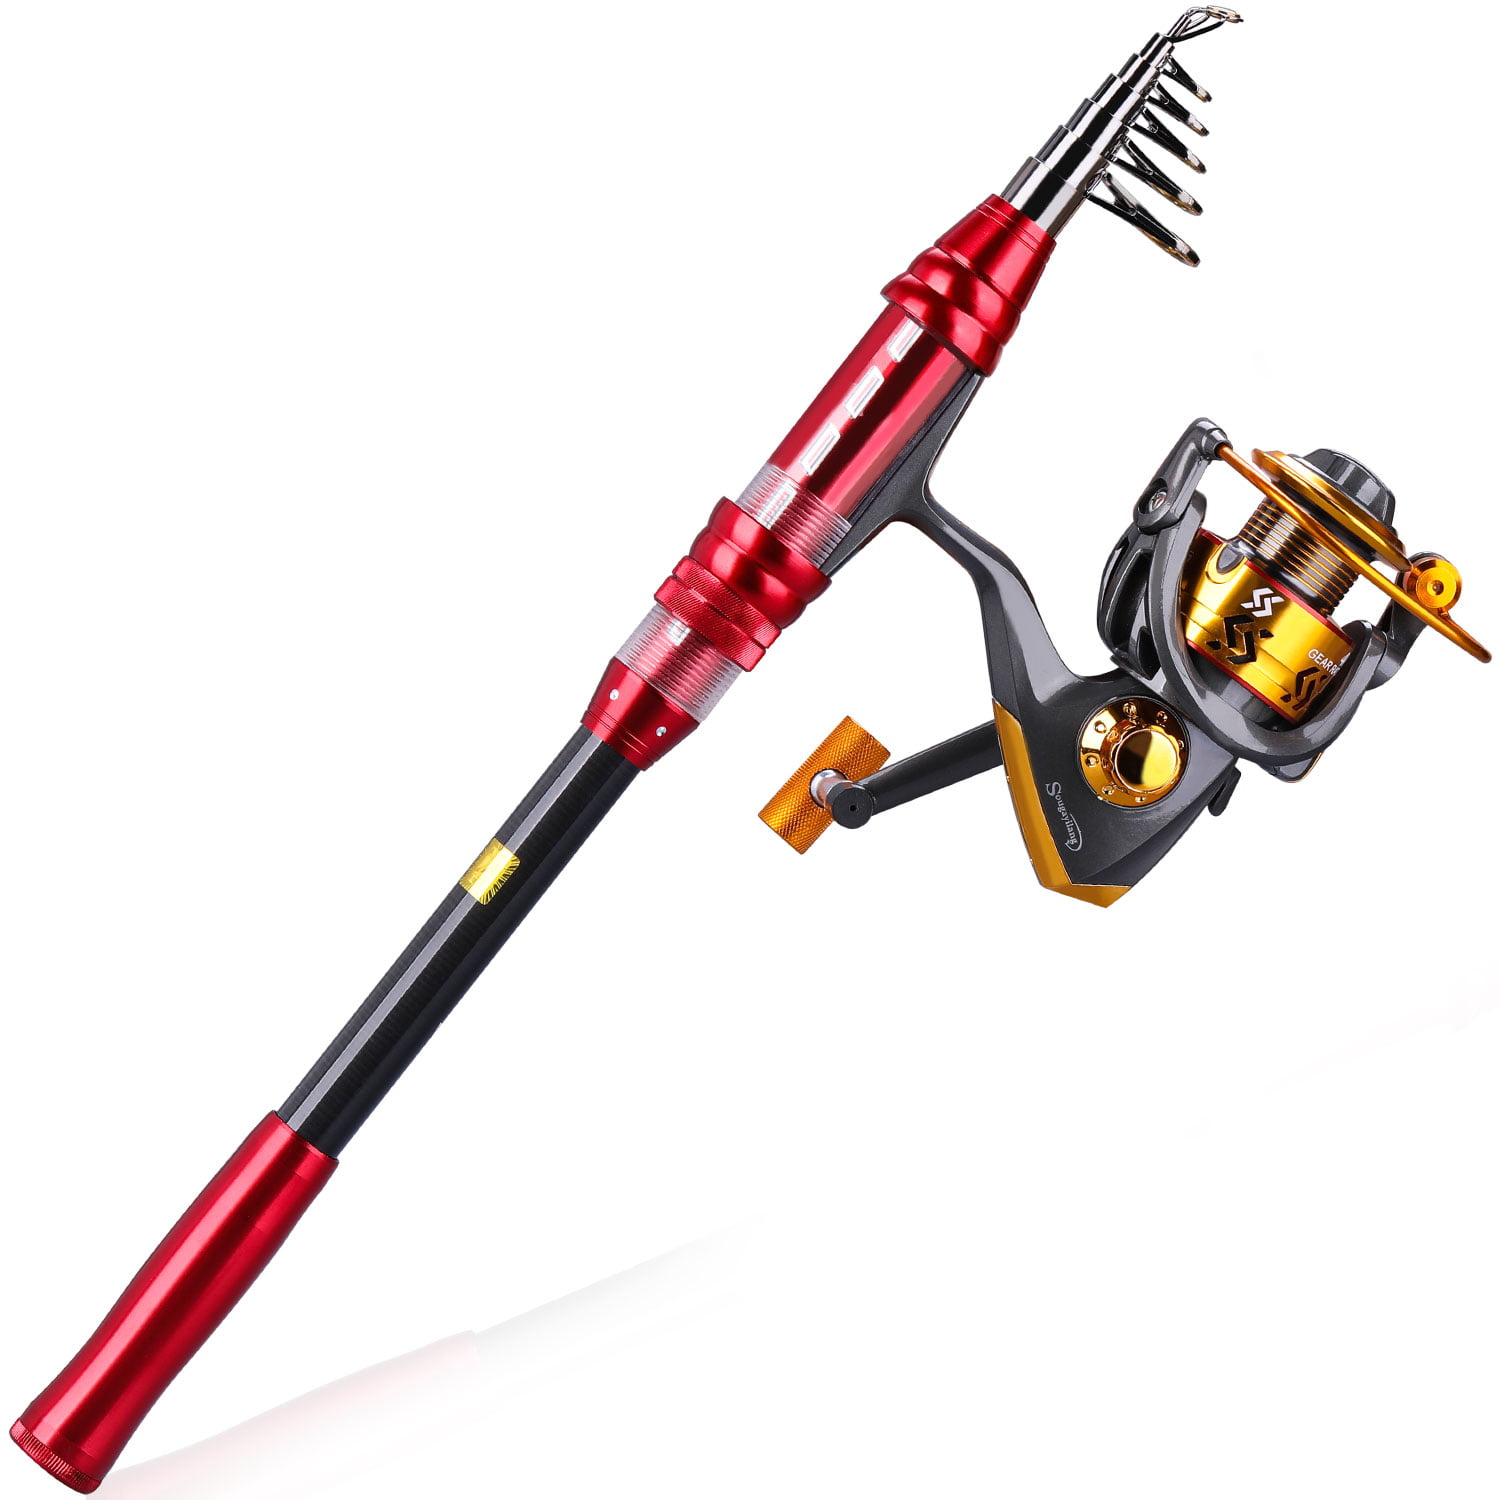 Sougayilang Fishing and Reel Combo Portable Telescopic Fishing Spinning Reel  for Travel/Saltwater/Freshwater Fishing, 2.1M/6.89FT Rod+XY3000 Reel price  in UAE,  UAE